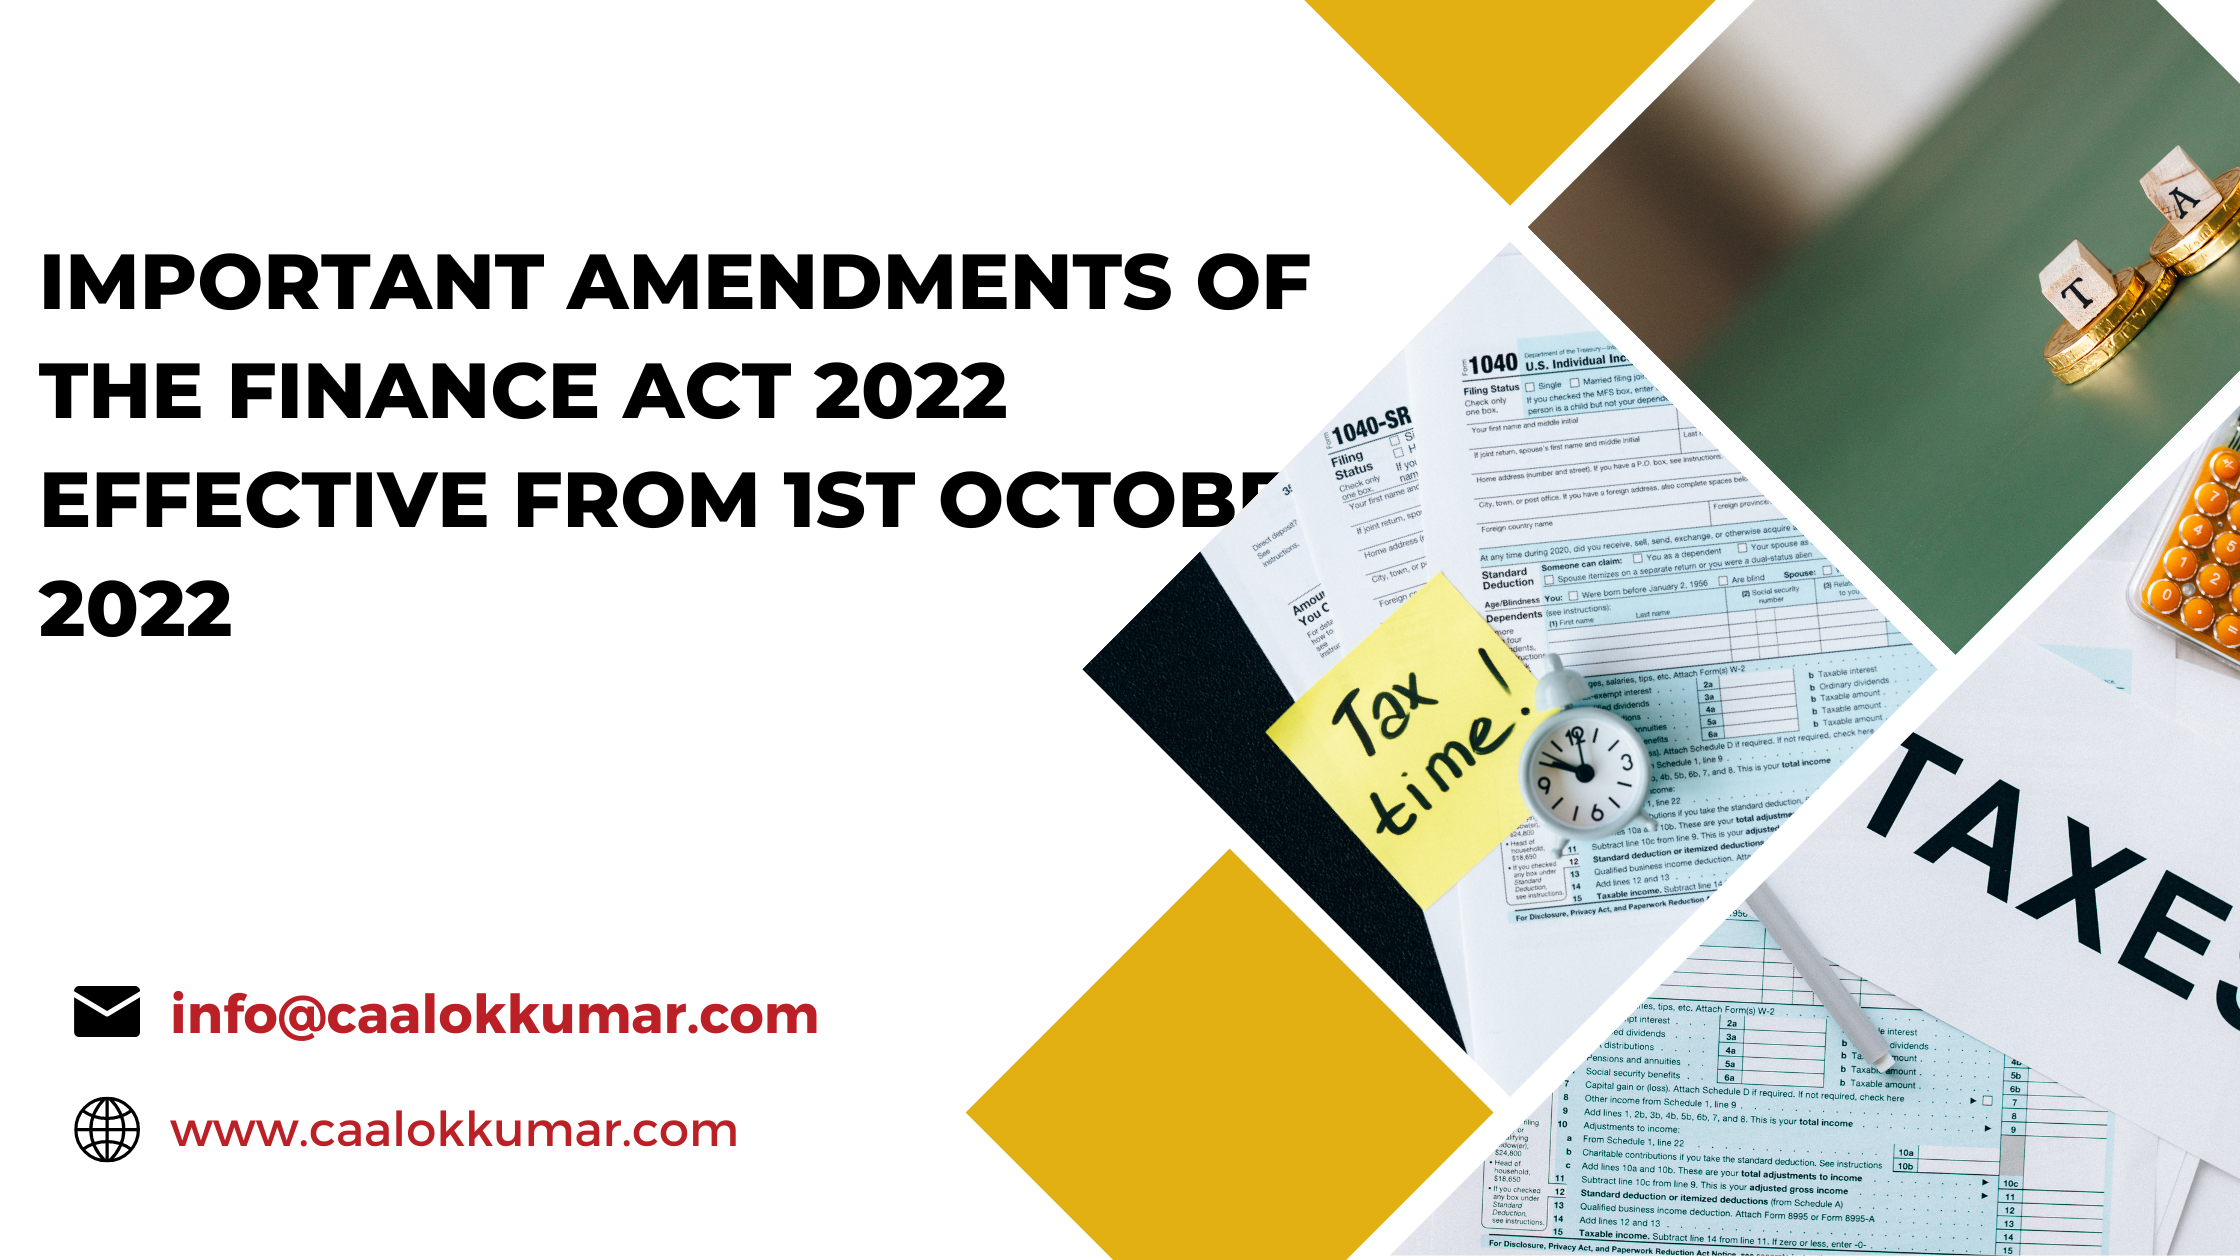 Amendments made vide the Finance Act, 2022 to be effective from 1st October, 2022